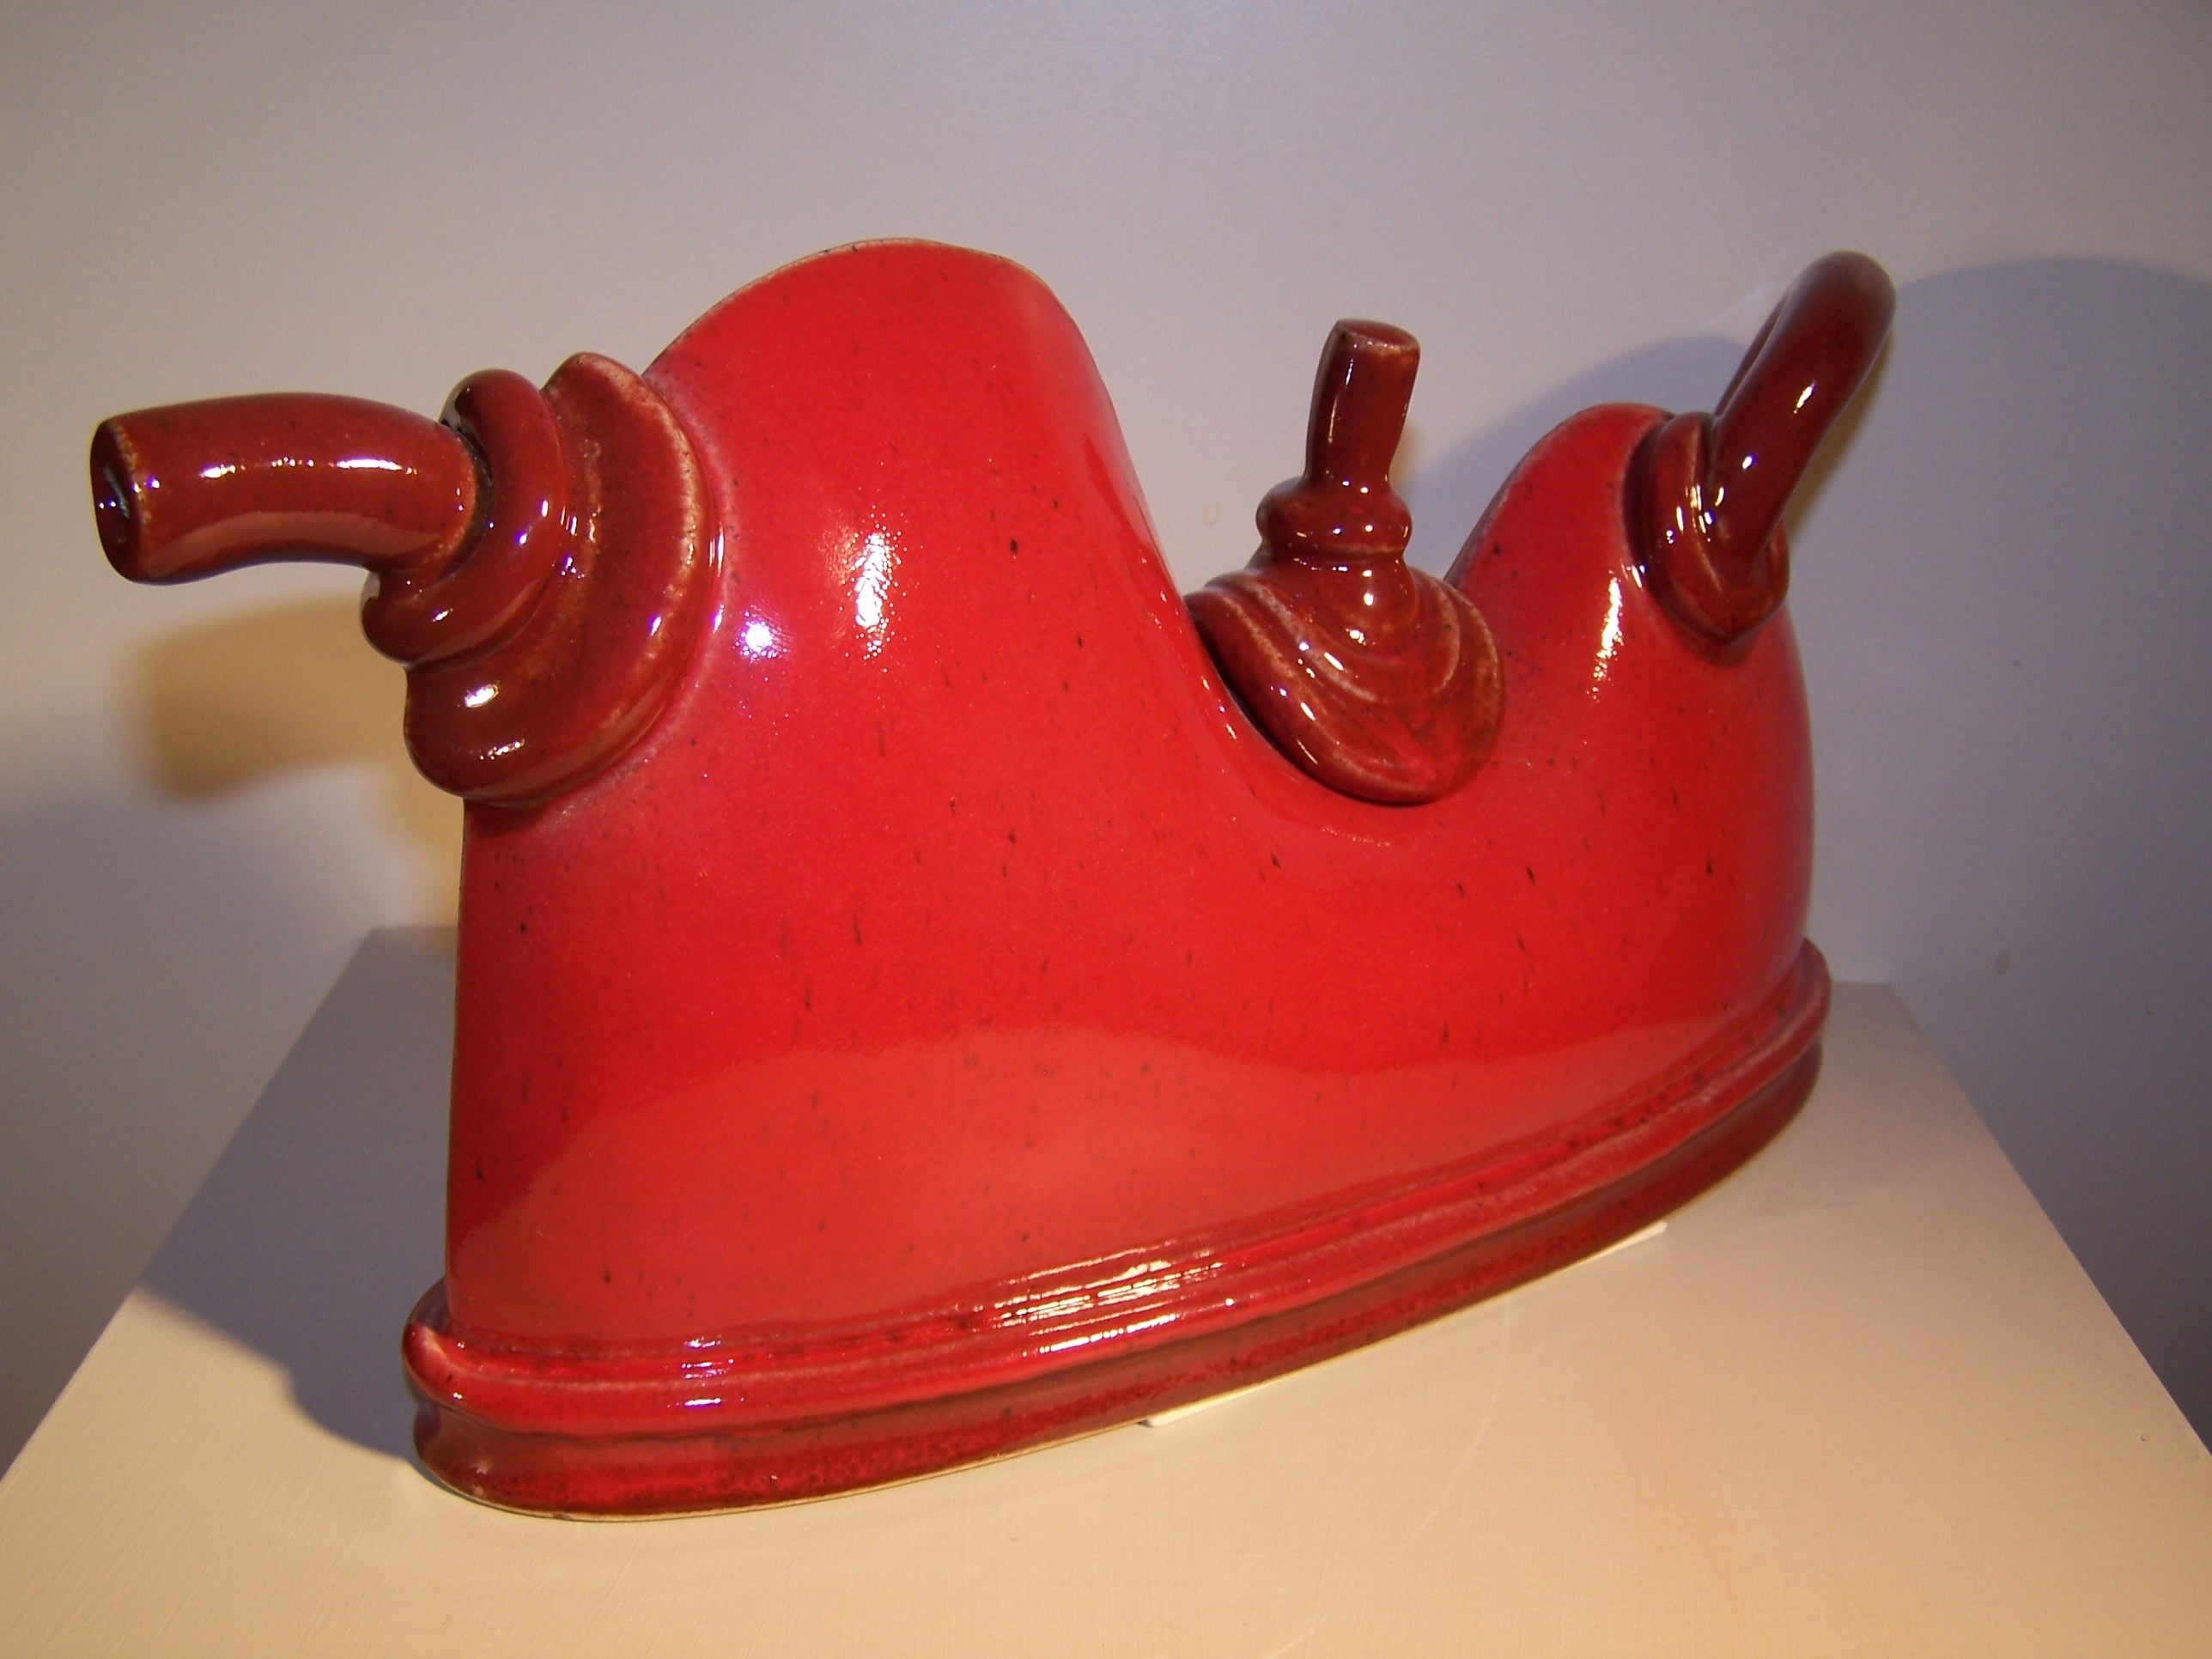 This art piece is named ‘Red Teapot' 